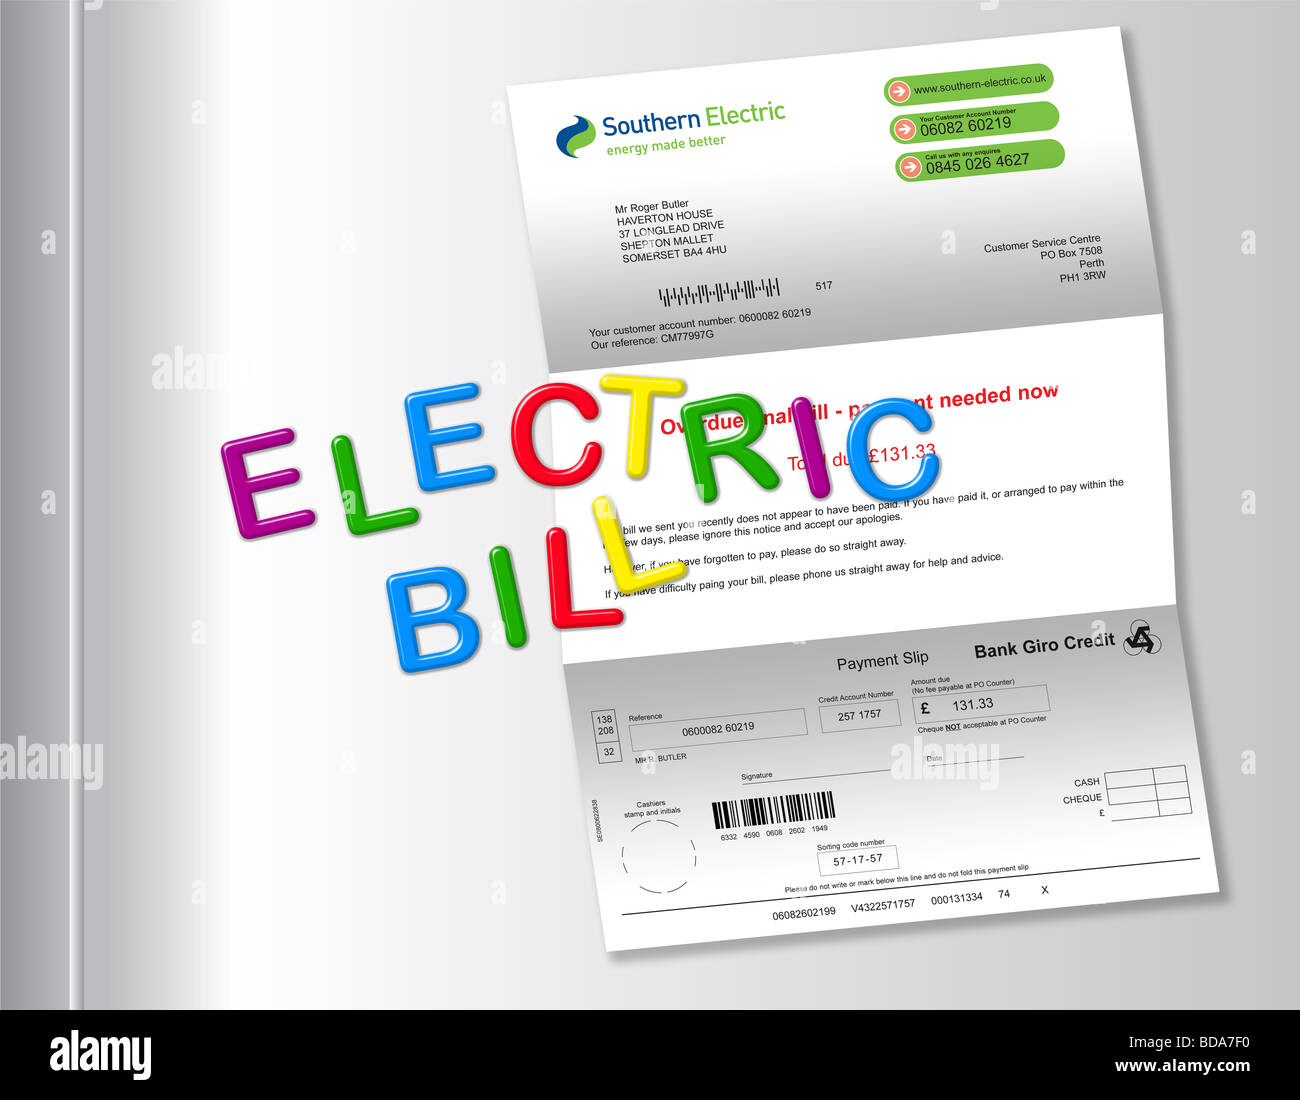 Electric bill on fridge with ‘ELECTRIC BILL’ spelt out by magnetic fridge letters. Stock Photo